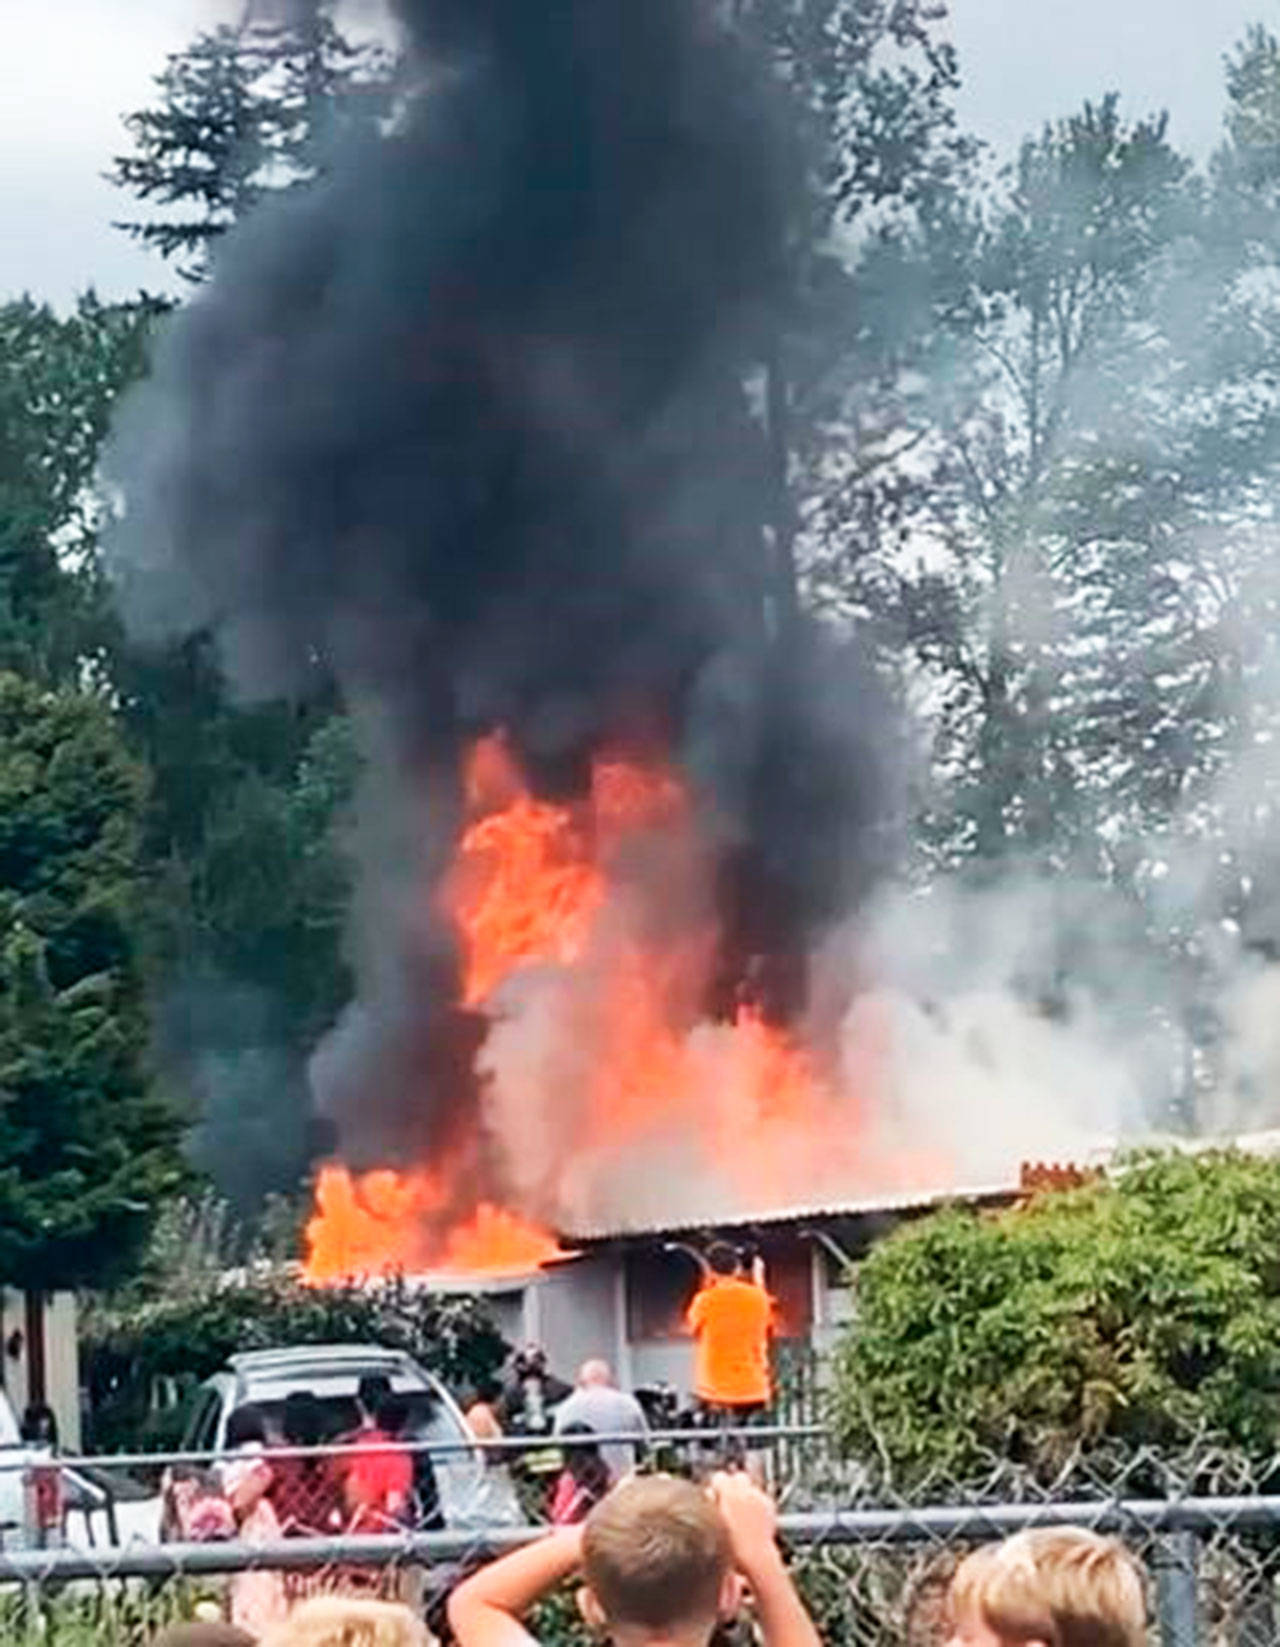 Fire damages a residential unit Saturday, Aug. 29 near the 15200 block of Southeast 272nd Street in Kent. COURTESY PHOTO, Puget Sound Fire